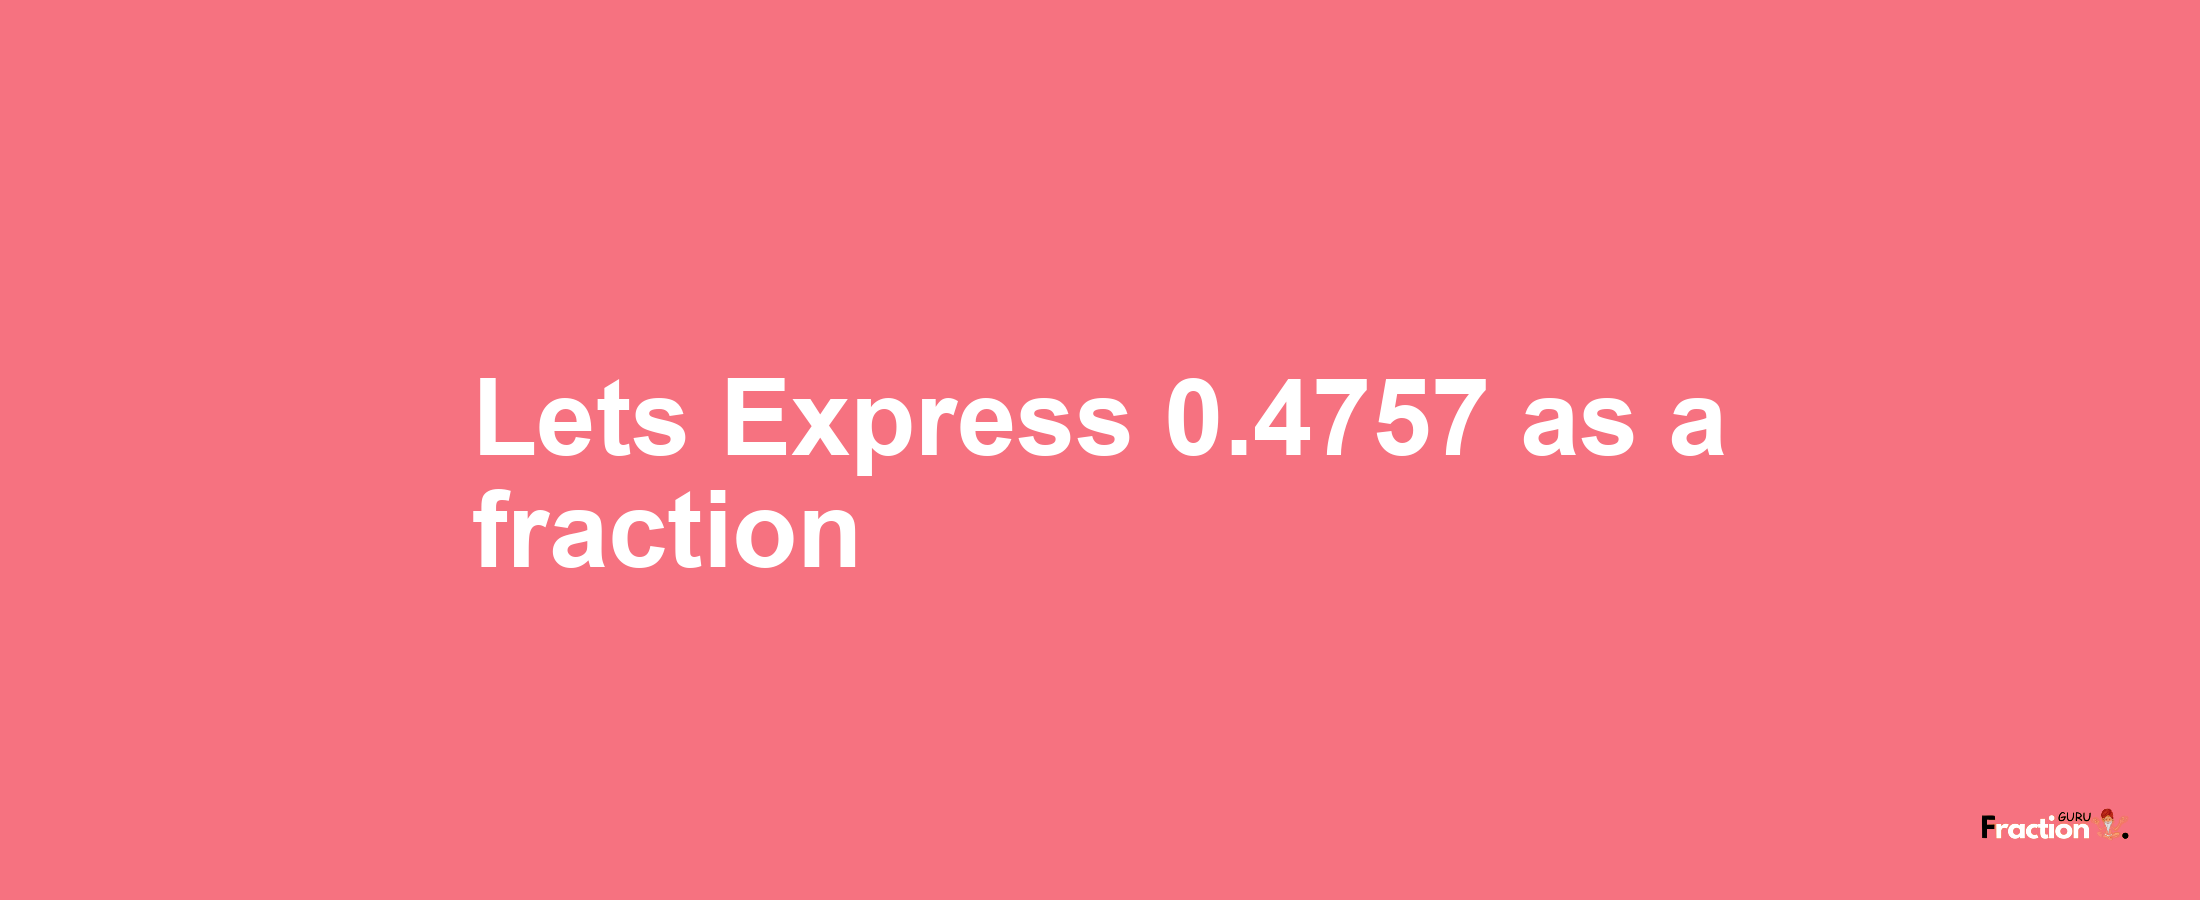 Lets Express 0.4757 as afraction